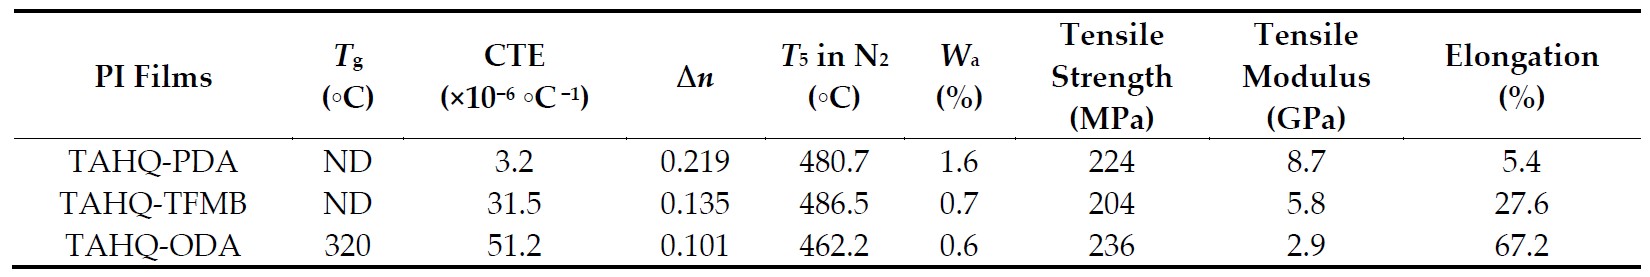 Table 1. Properties of TAHQ-derived PEsI Films [40].